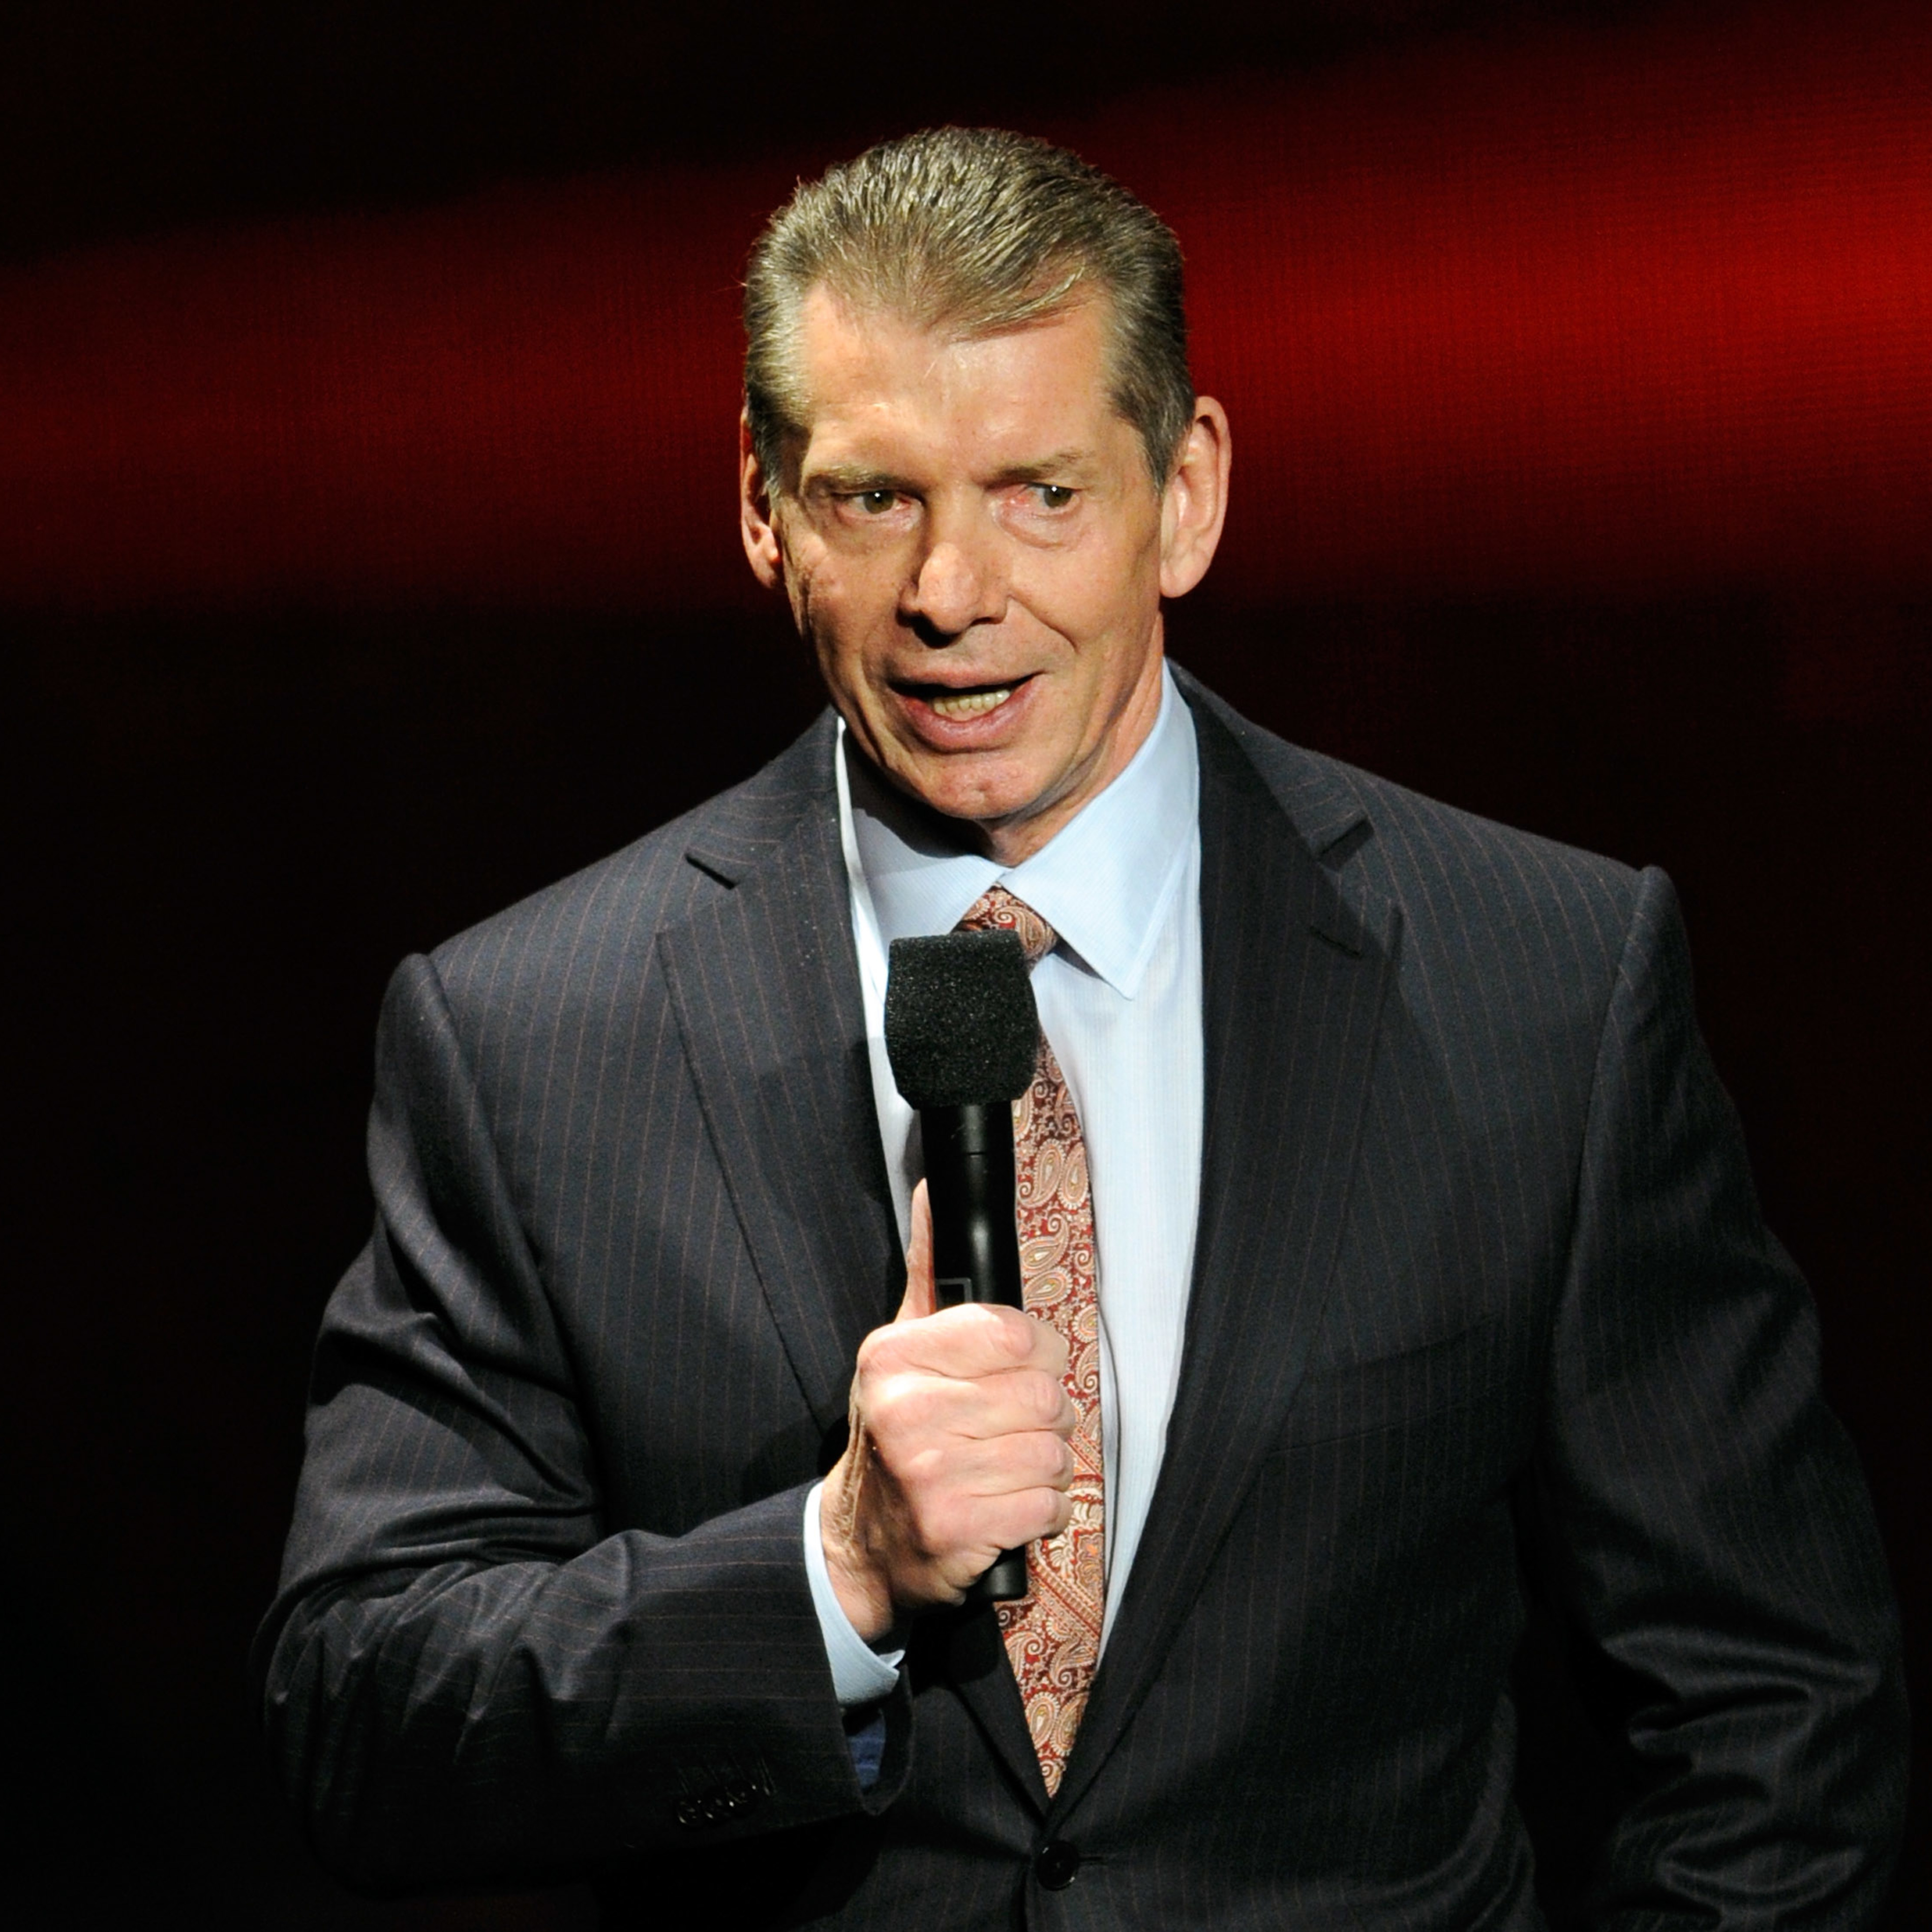 WWE Twitter Questions Vince McMahon’s Appearance on SmackDown amid Investigation